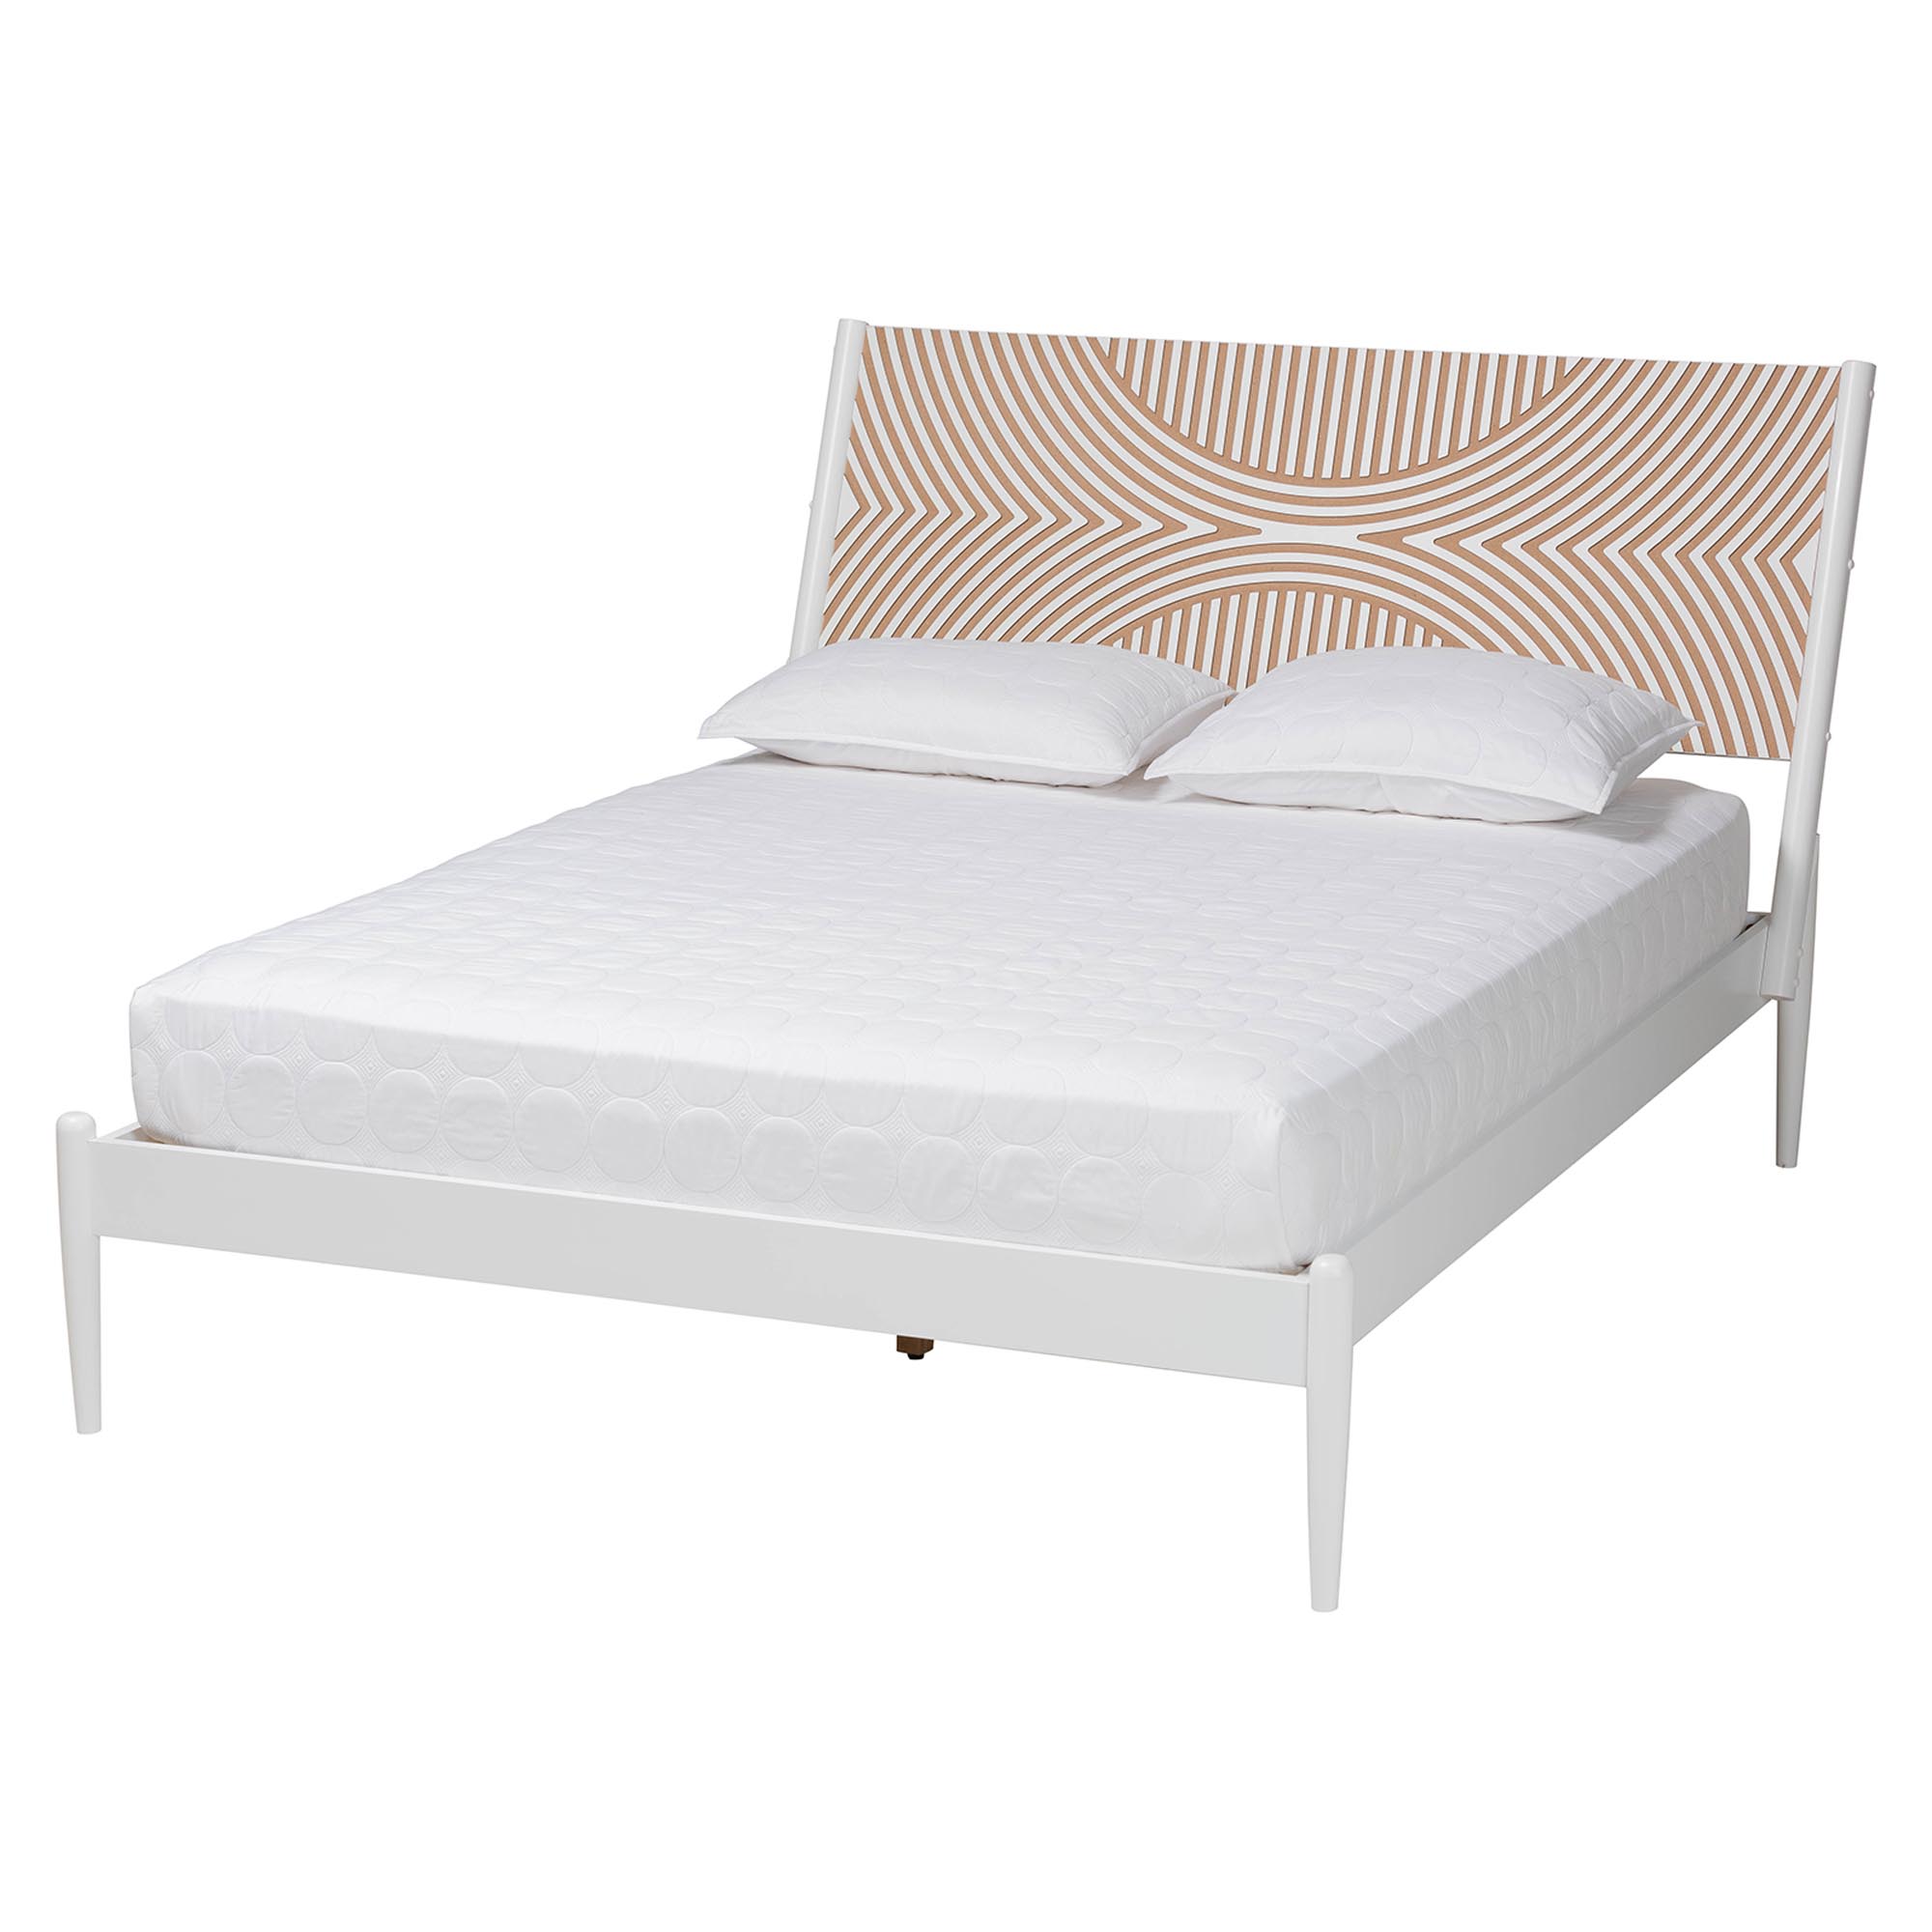 Baxton Studio Louetta Coastal White Queen Size Platform Bed with Carved Contrasting Headboard